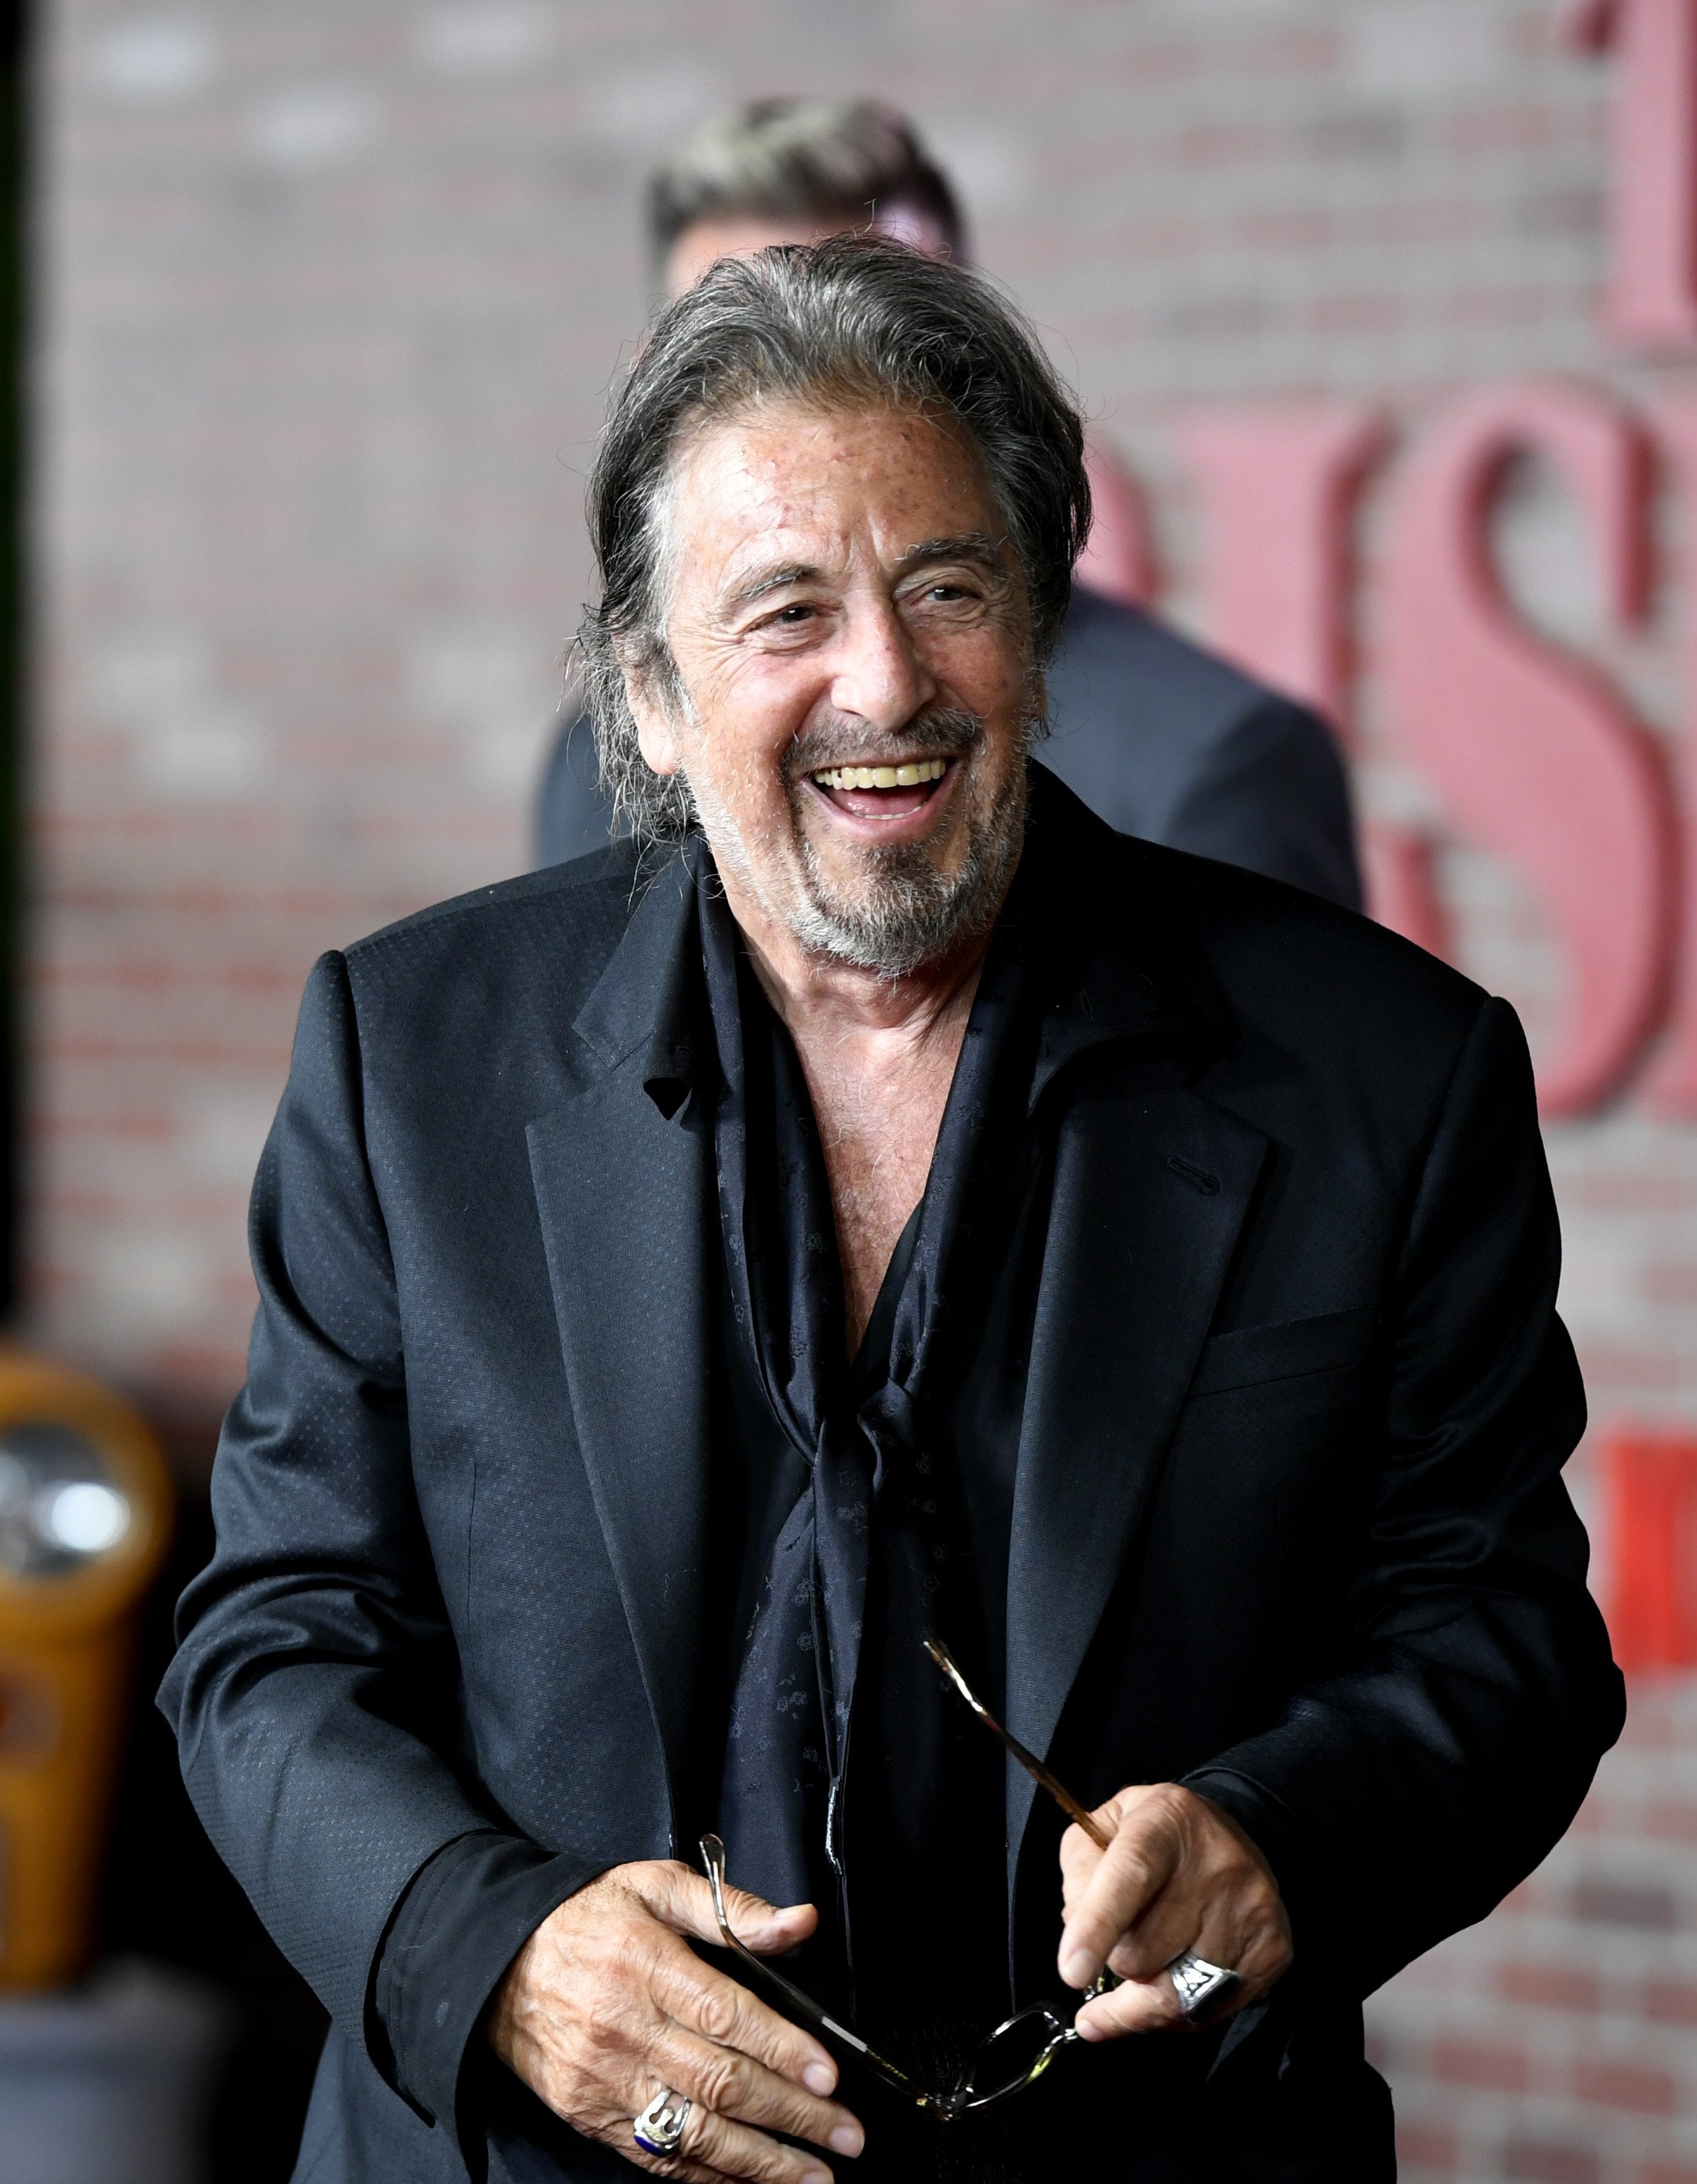 Al Pacino attends the Premiere Of Netflix's "The Irishman" at TCL Chinese Theatre on October 24, 2019, in Hollywood, California | Photo: Getty Images.